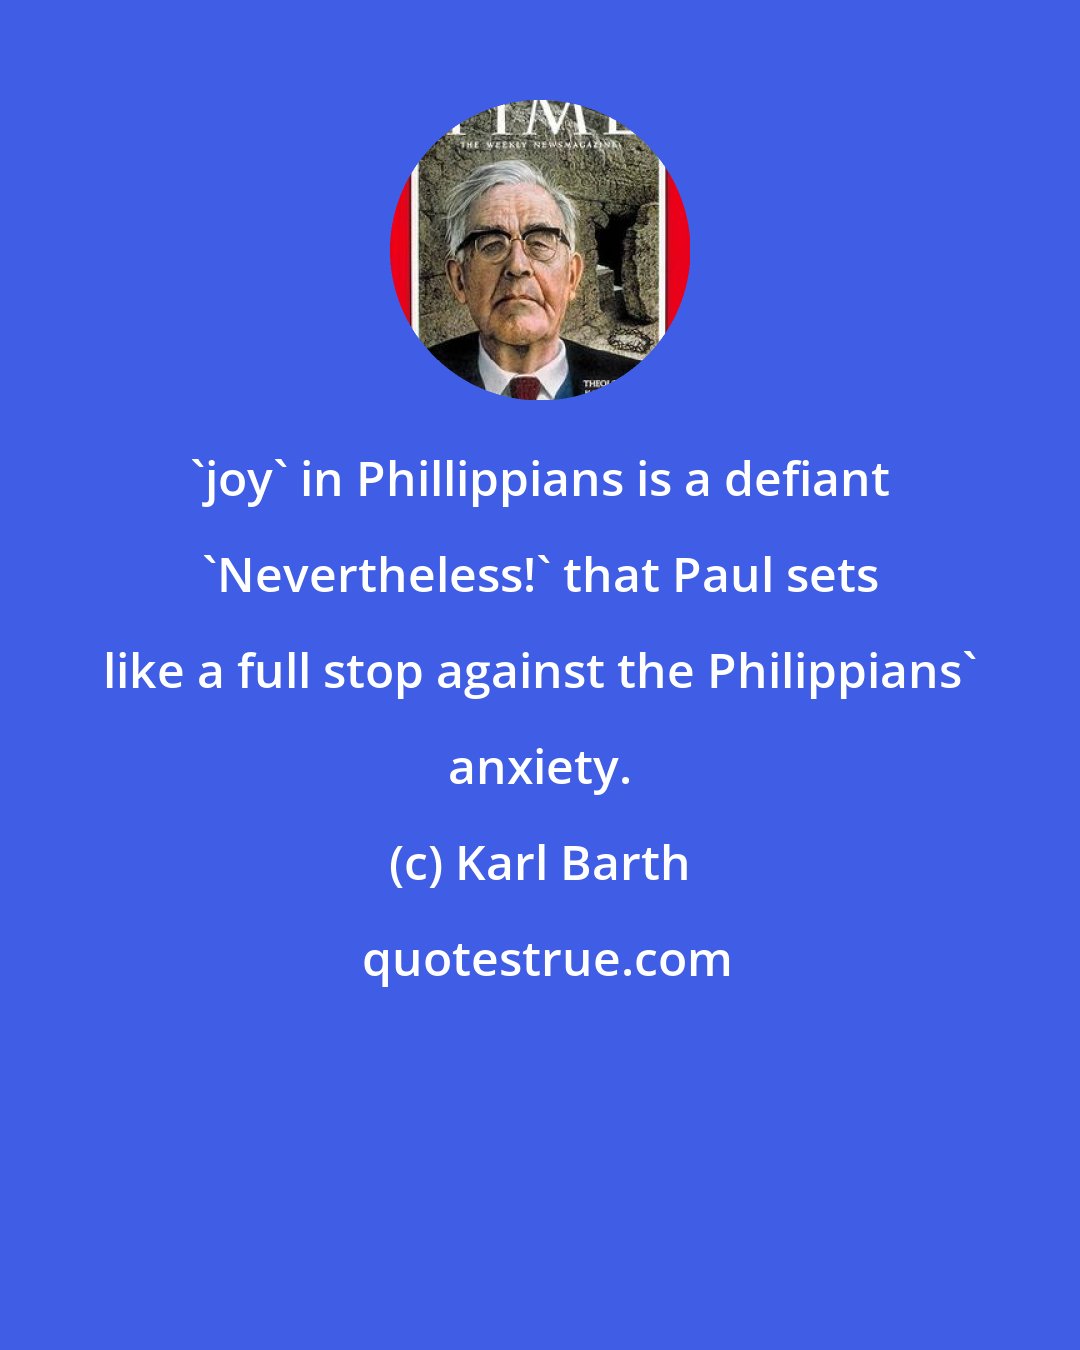 Karl Barth: 'joy' in Phillippians is a defiant 'Nevertheless!' that Paul sets like a full stop against the Philippians' anxiety.